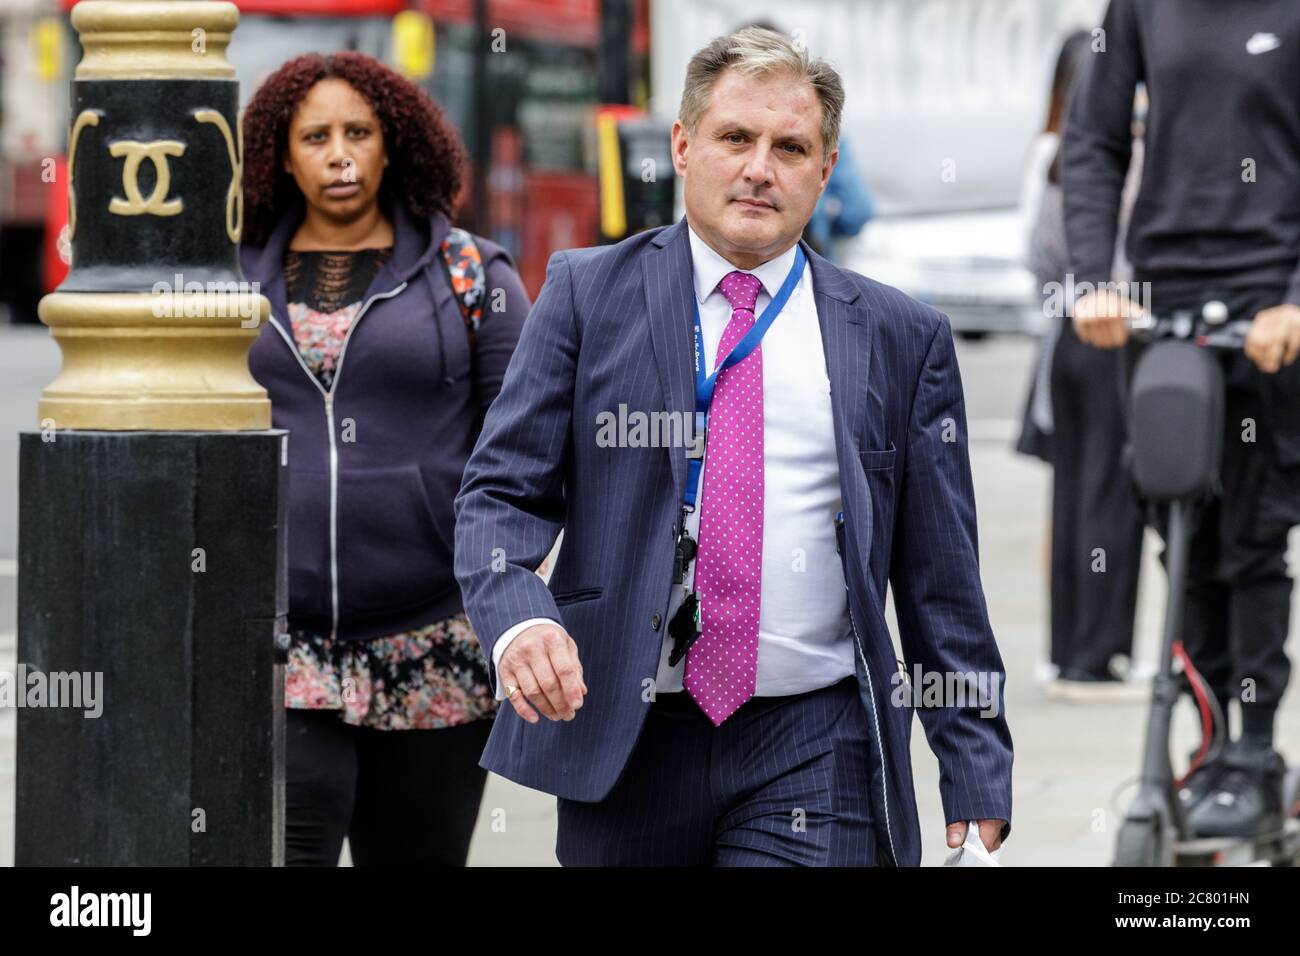 Jack Lopresti MP, British Conservative Party politician and Member of Parliament for or Filton and Bradley Stoke in Westminster,  London Stock Photo